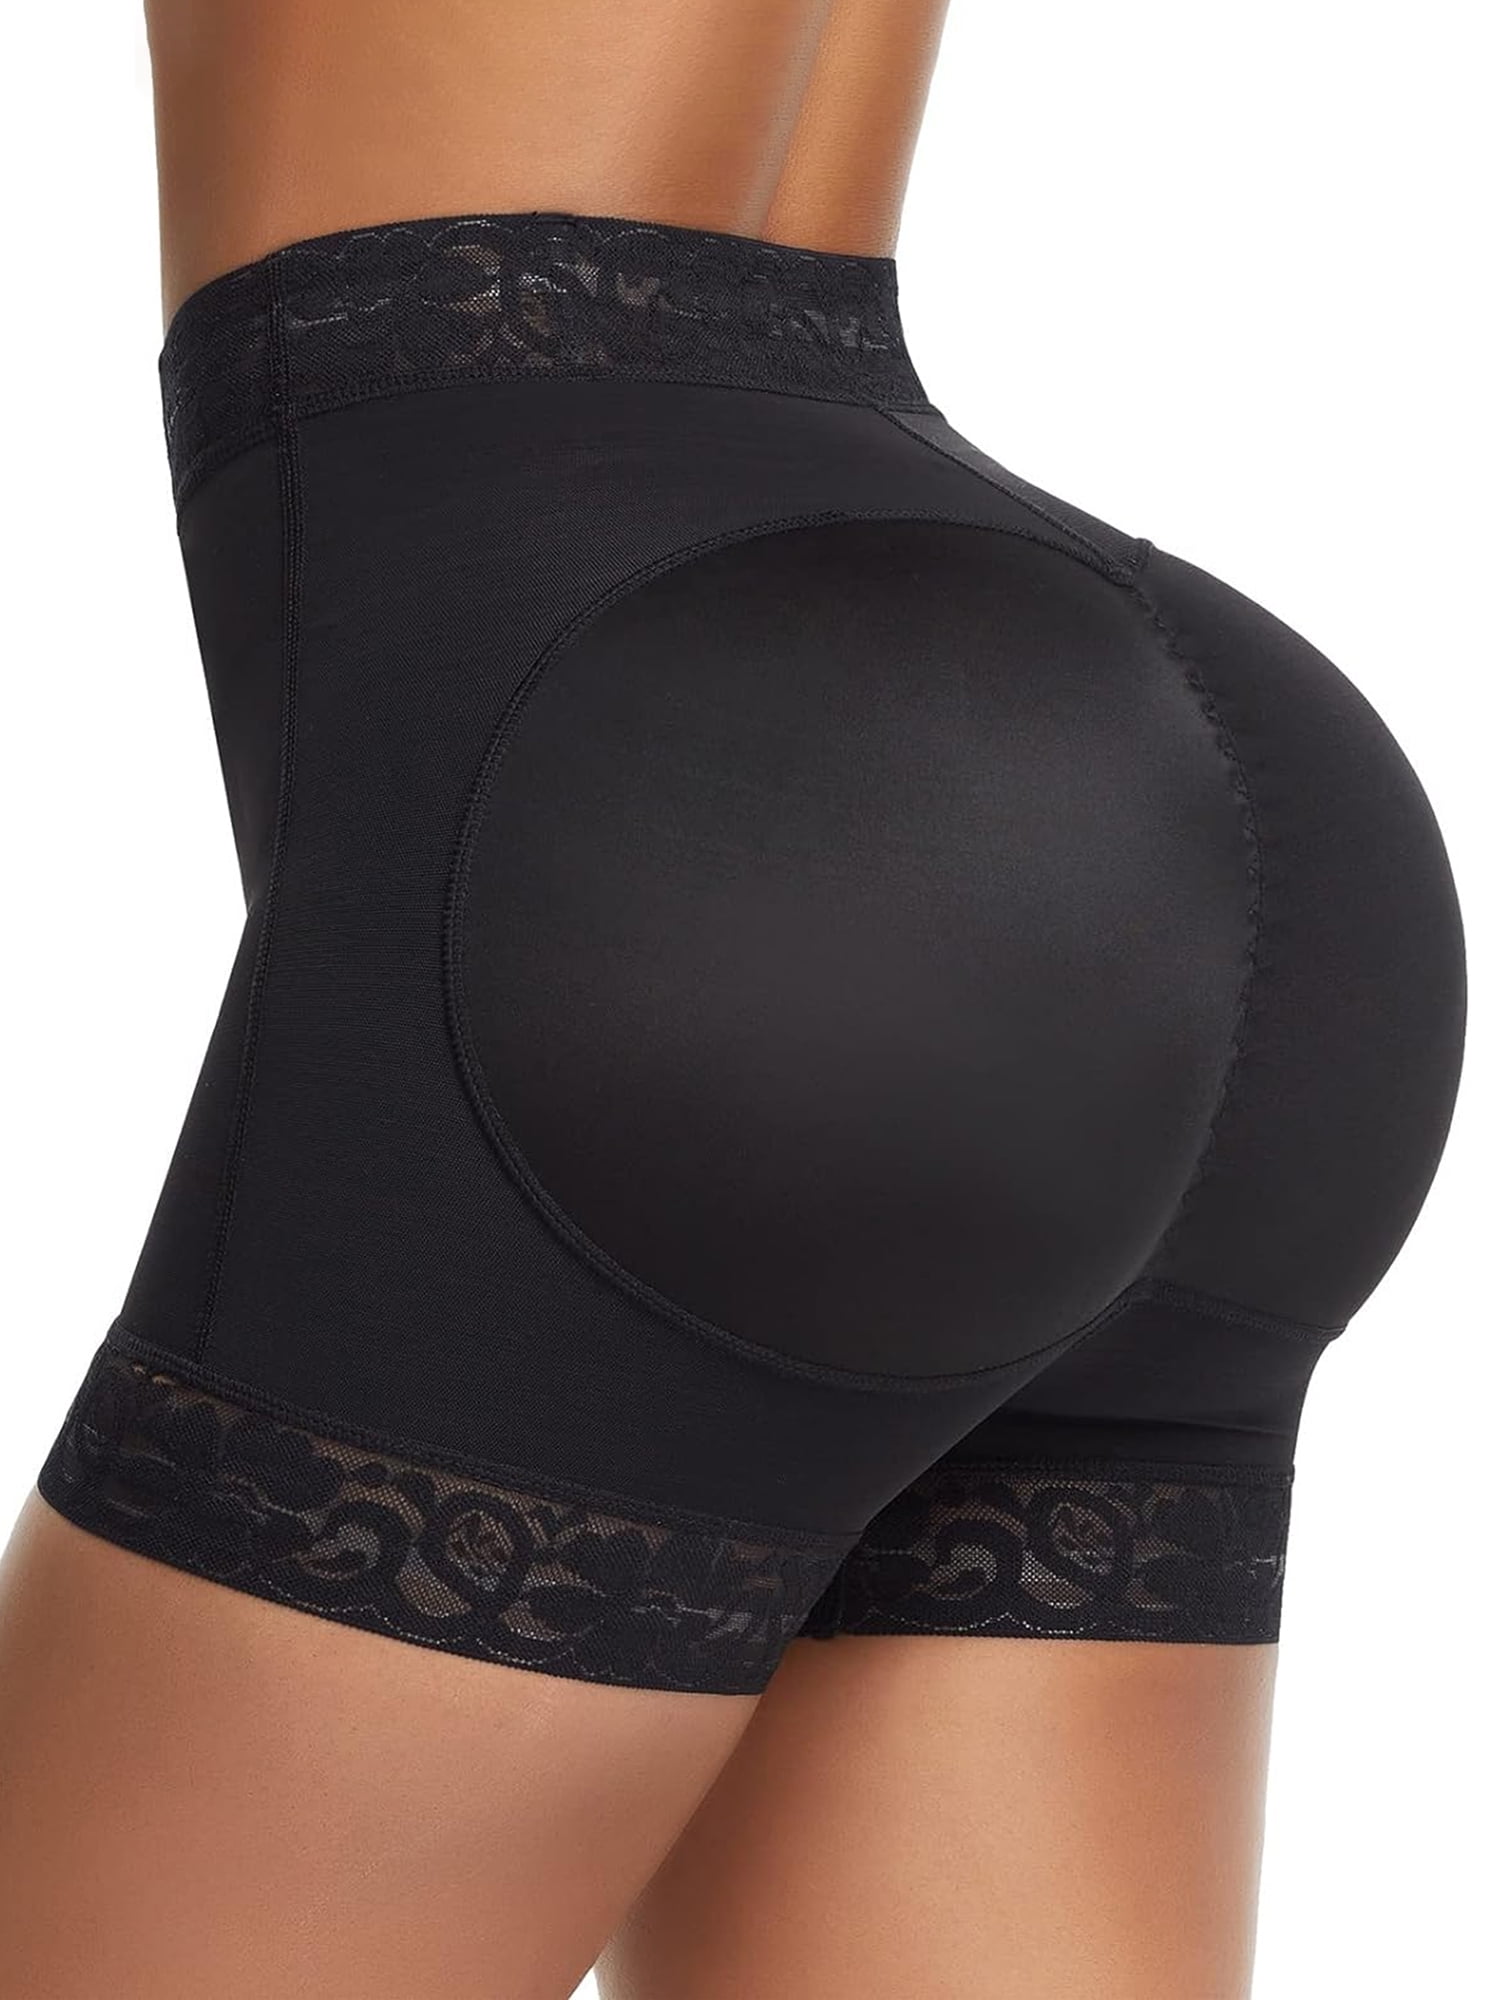 Maidenform Women's Flexees Firm Control Booty Lift Shorty